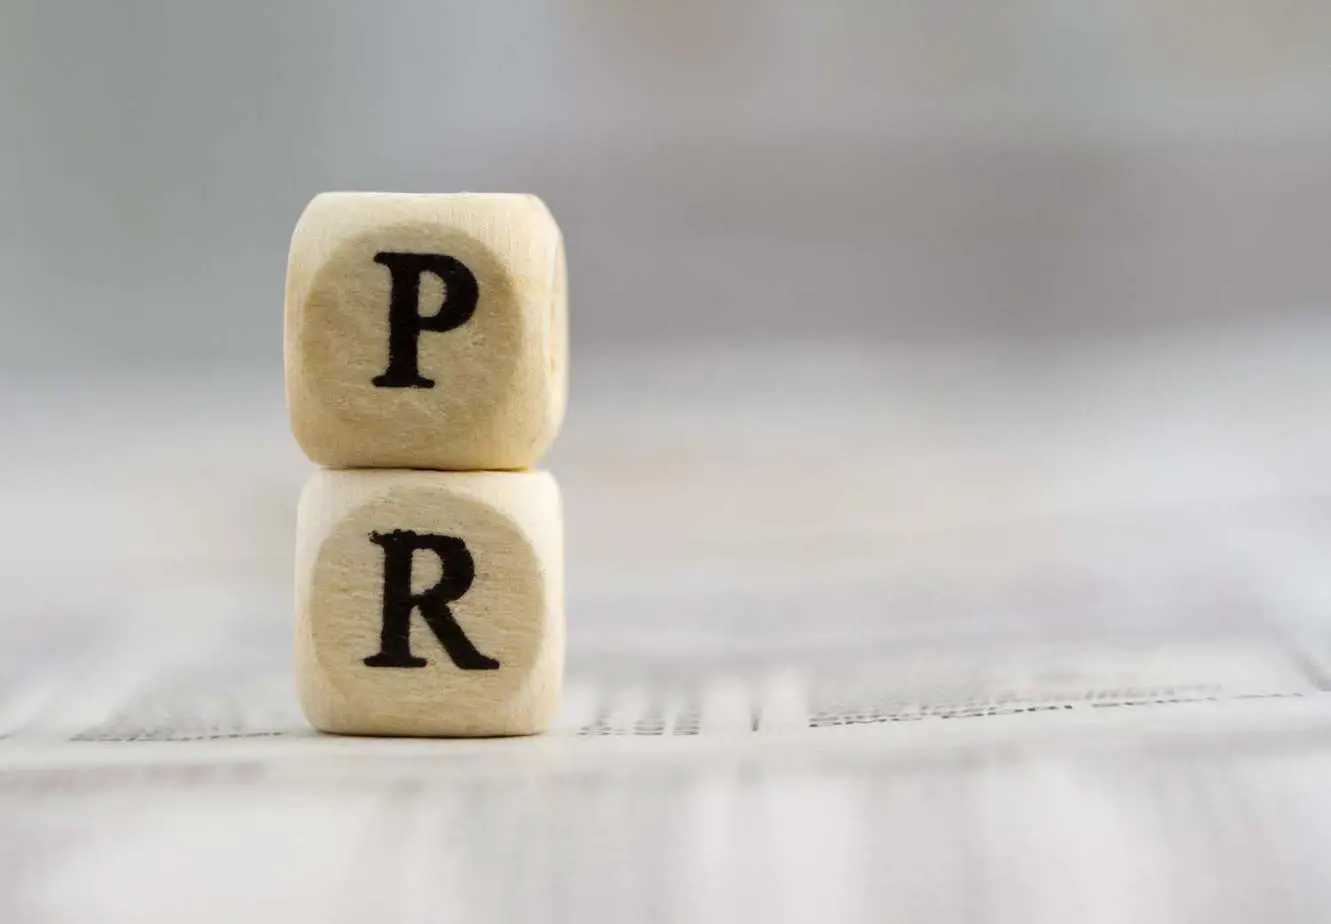 10 Public Relations Tips for Small Business Owners